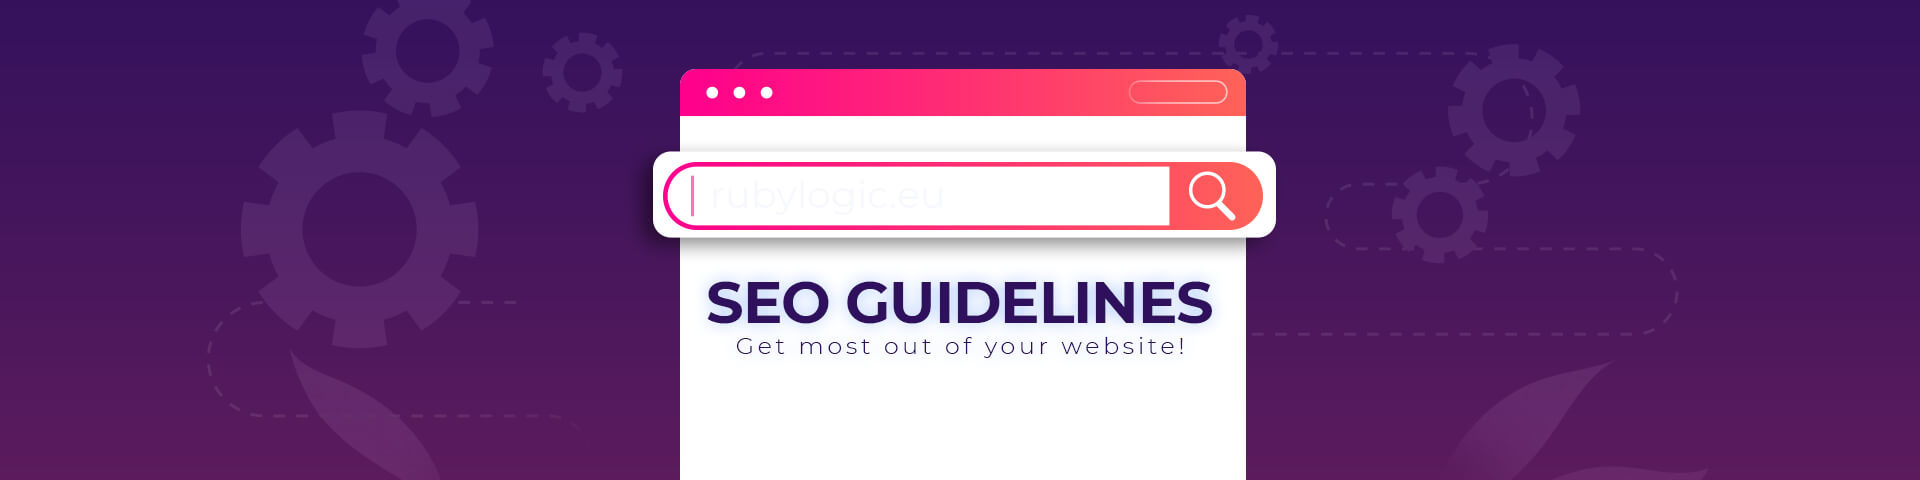 SEO Guidelines - Get Most out of Your Website